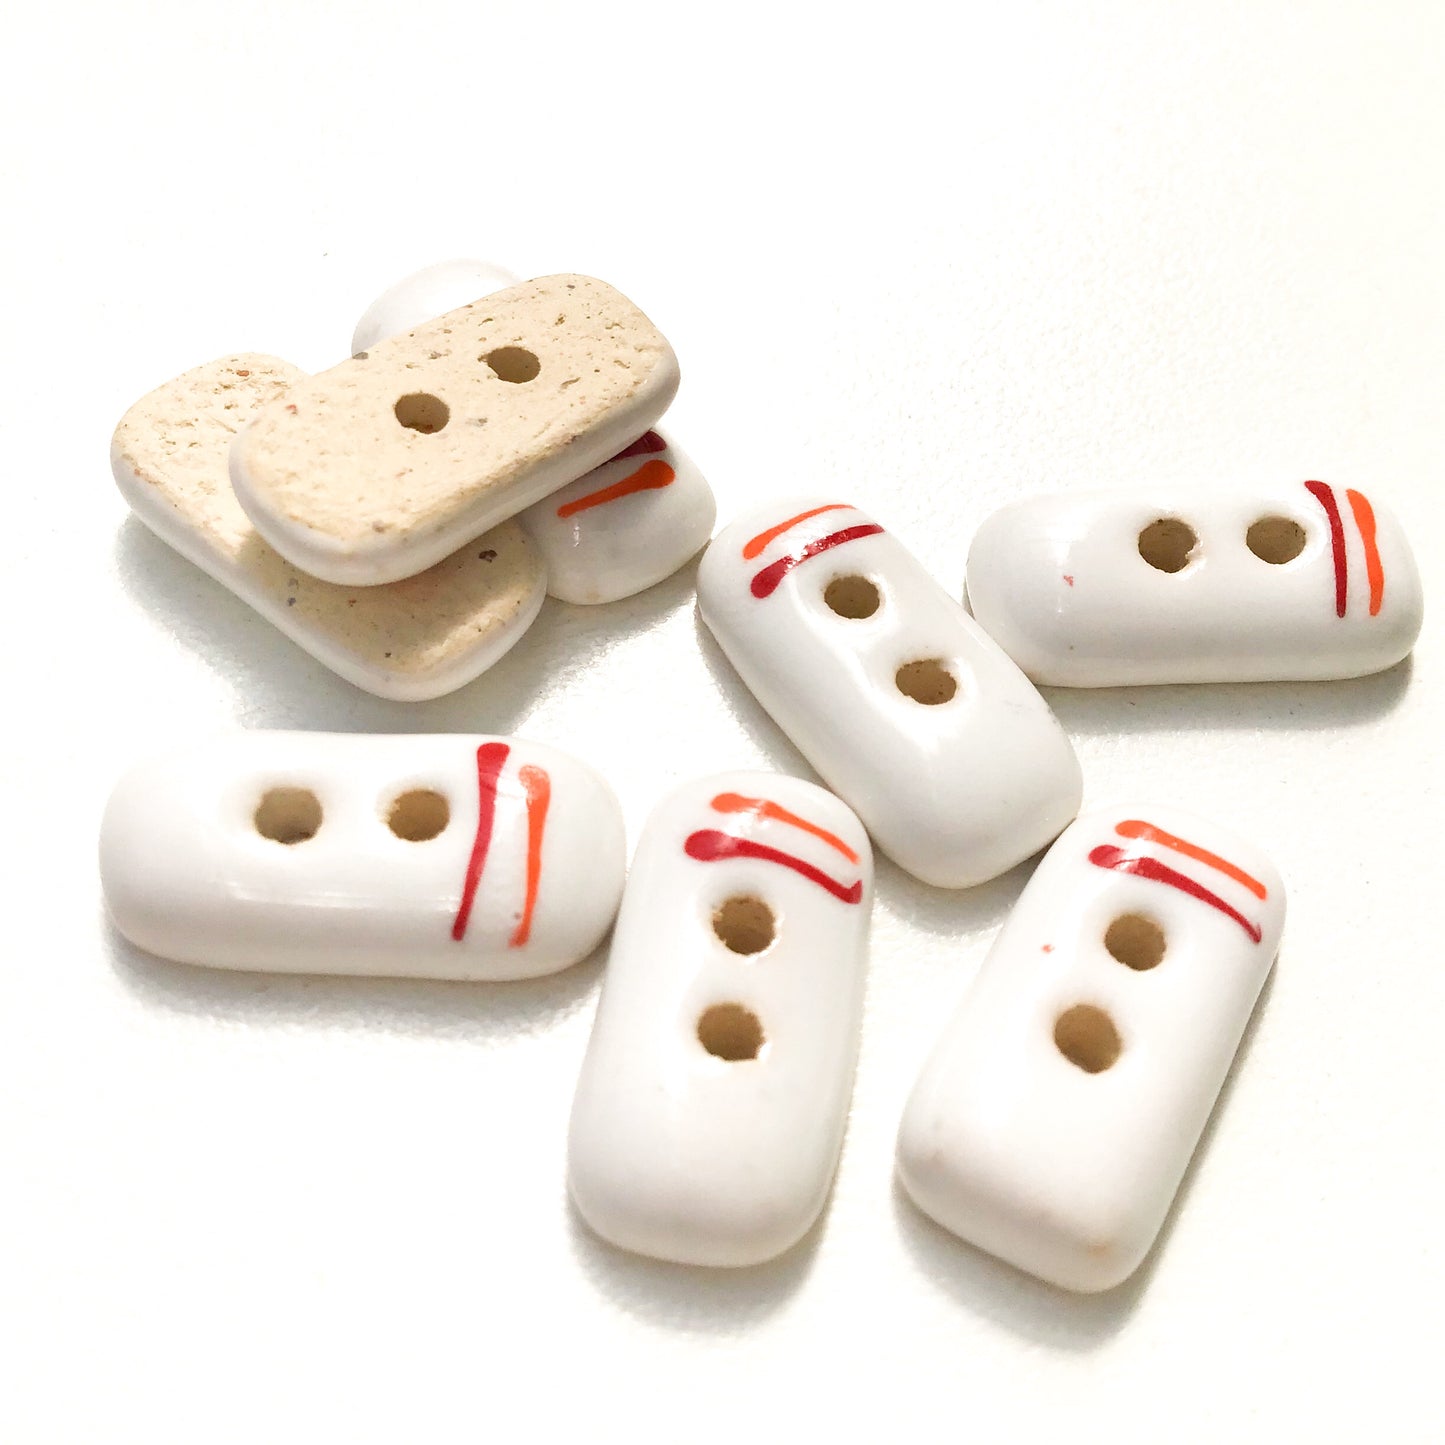 Rectangular White Ceramic Buttons with Orange + Red Lines - White Clay Buttons - 3/8" x 3/4" - 8 Pack